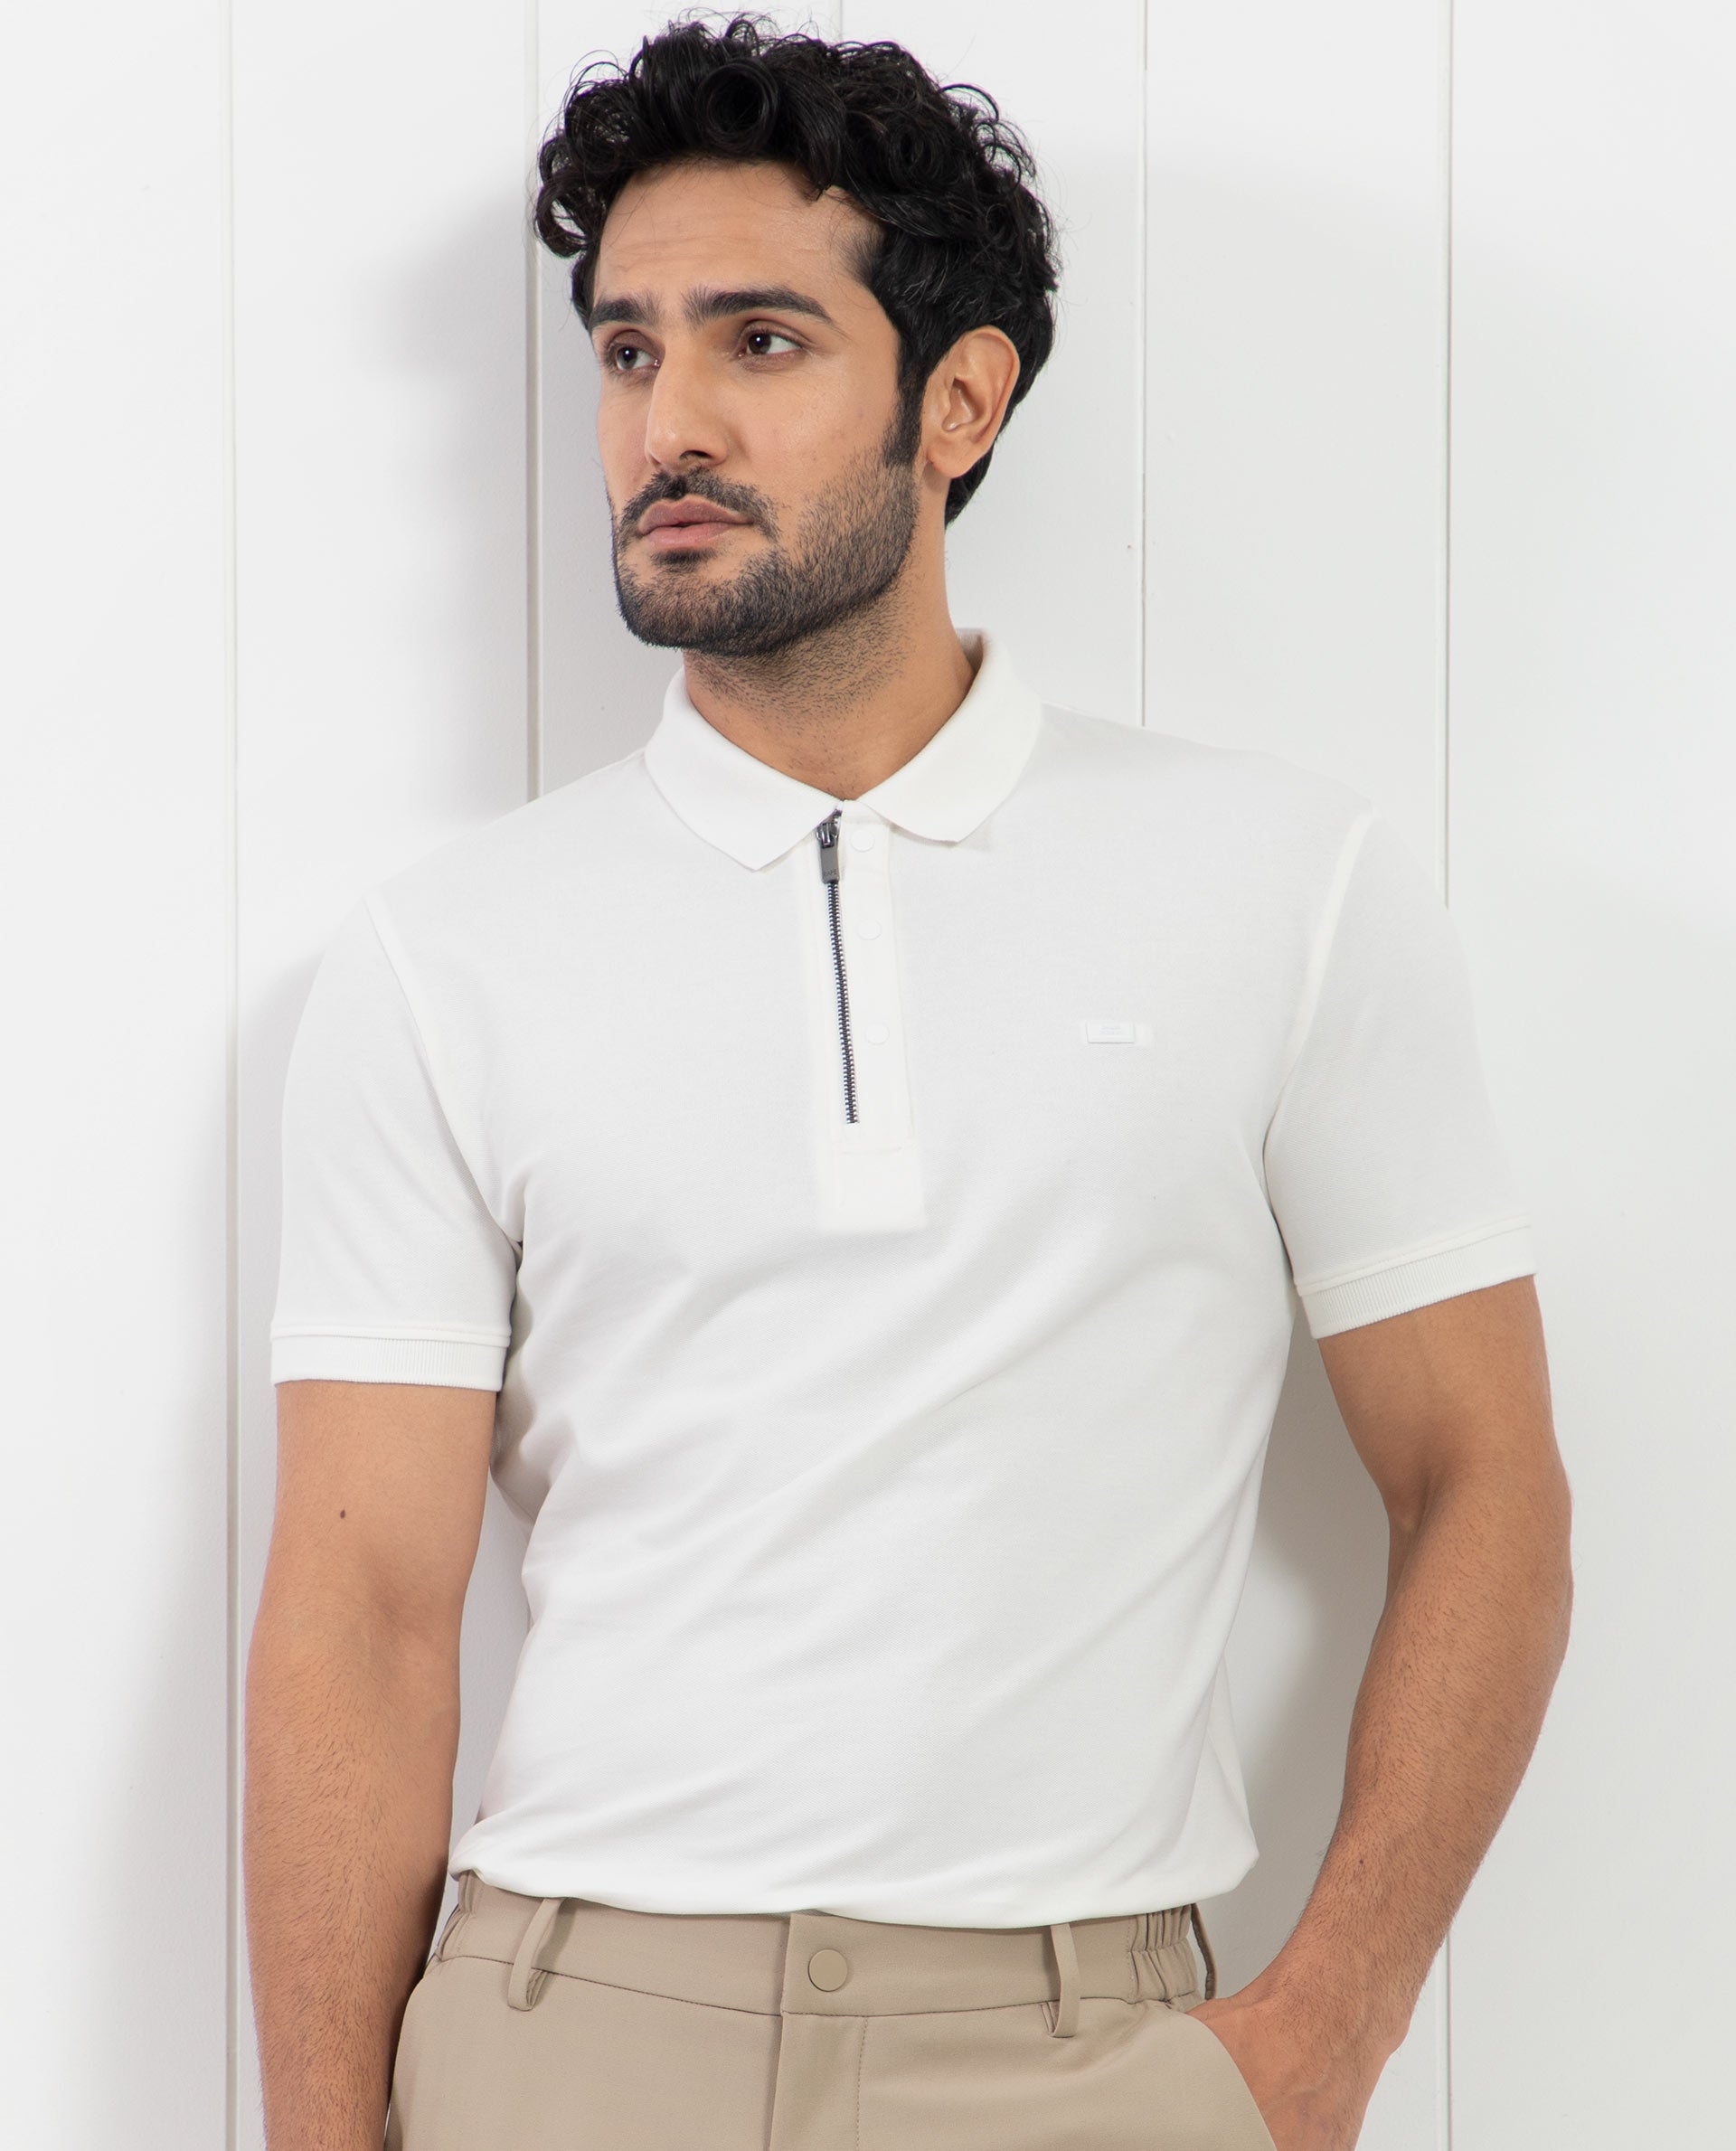 These White Polo Shirt Outfits Are Dope AF  LIFESTYLE BY PS